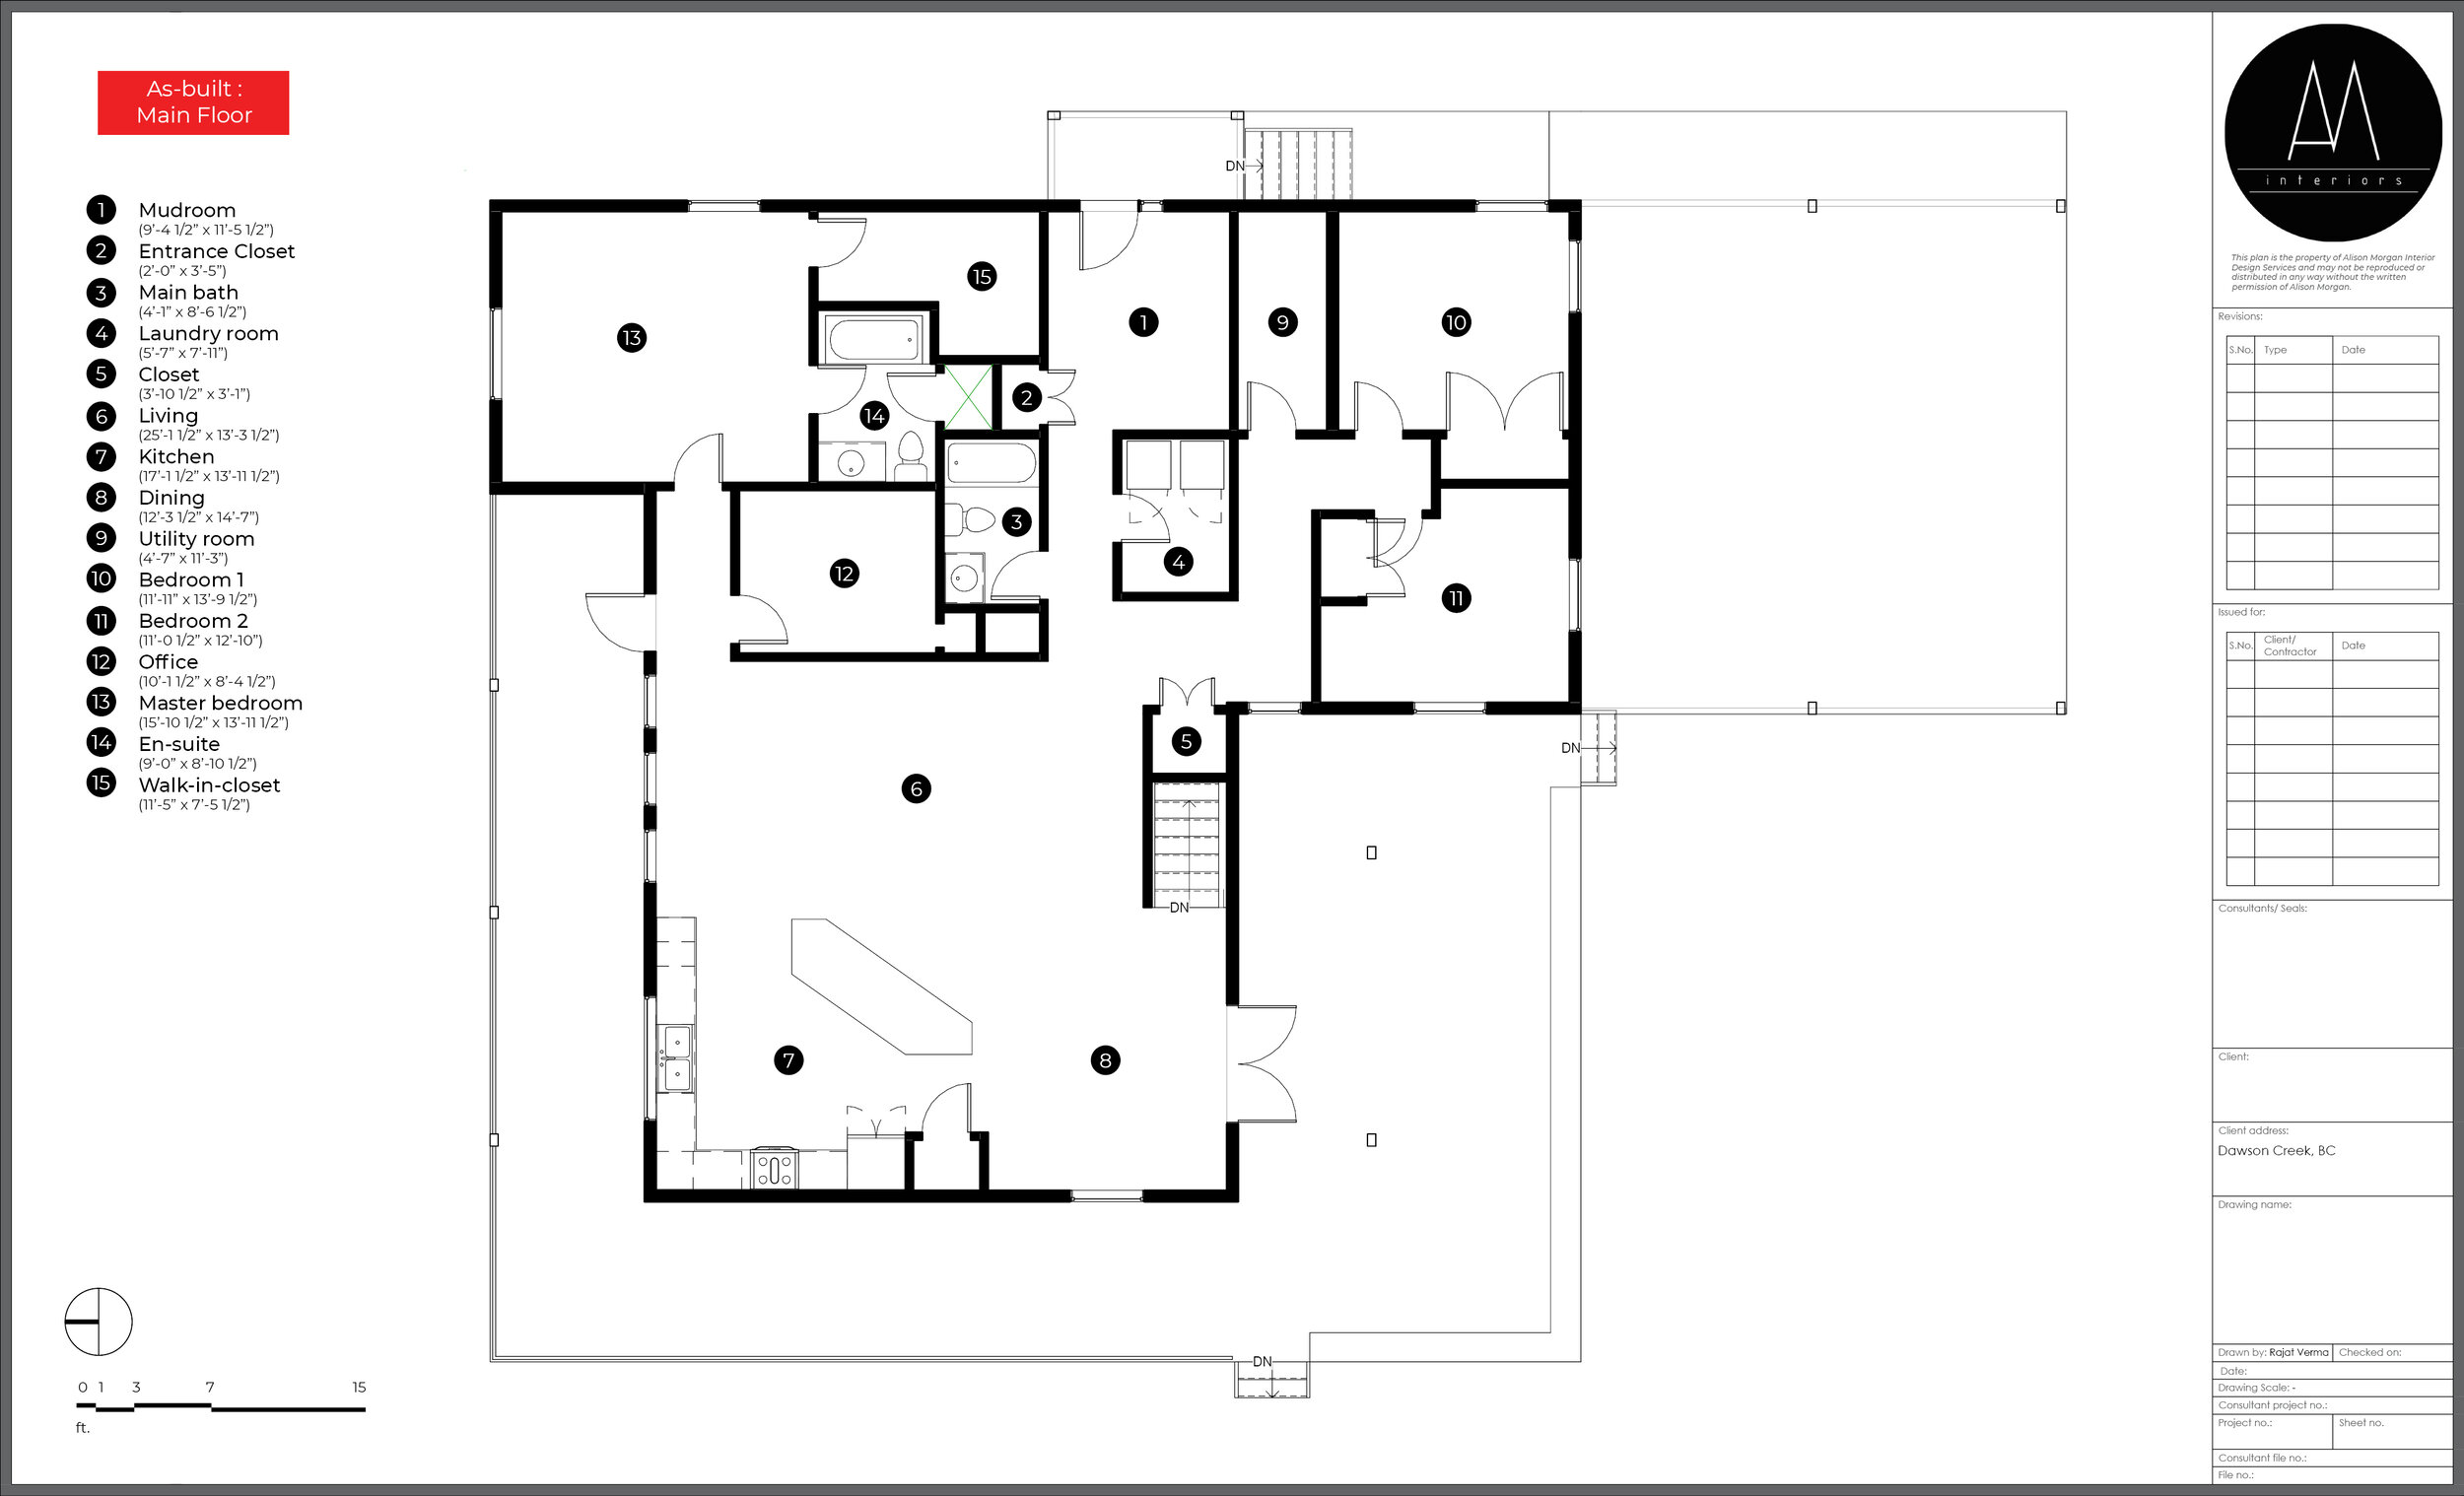 Kevin's residence_Plans_14th July, 20212.jpg